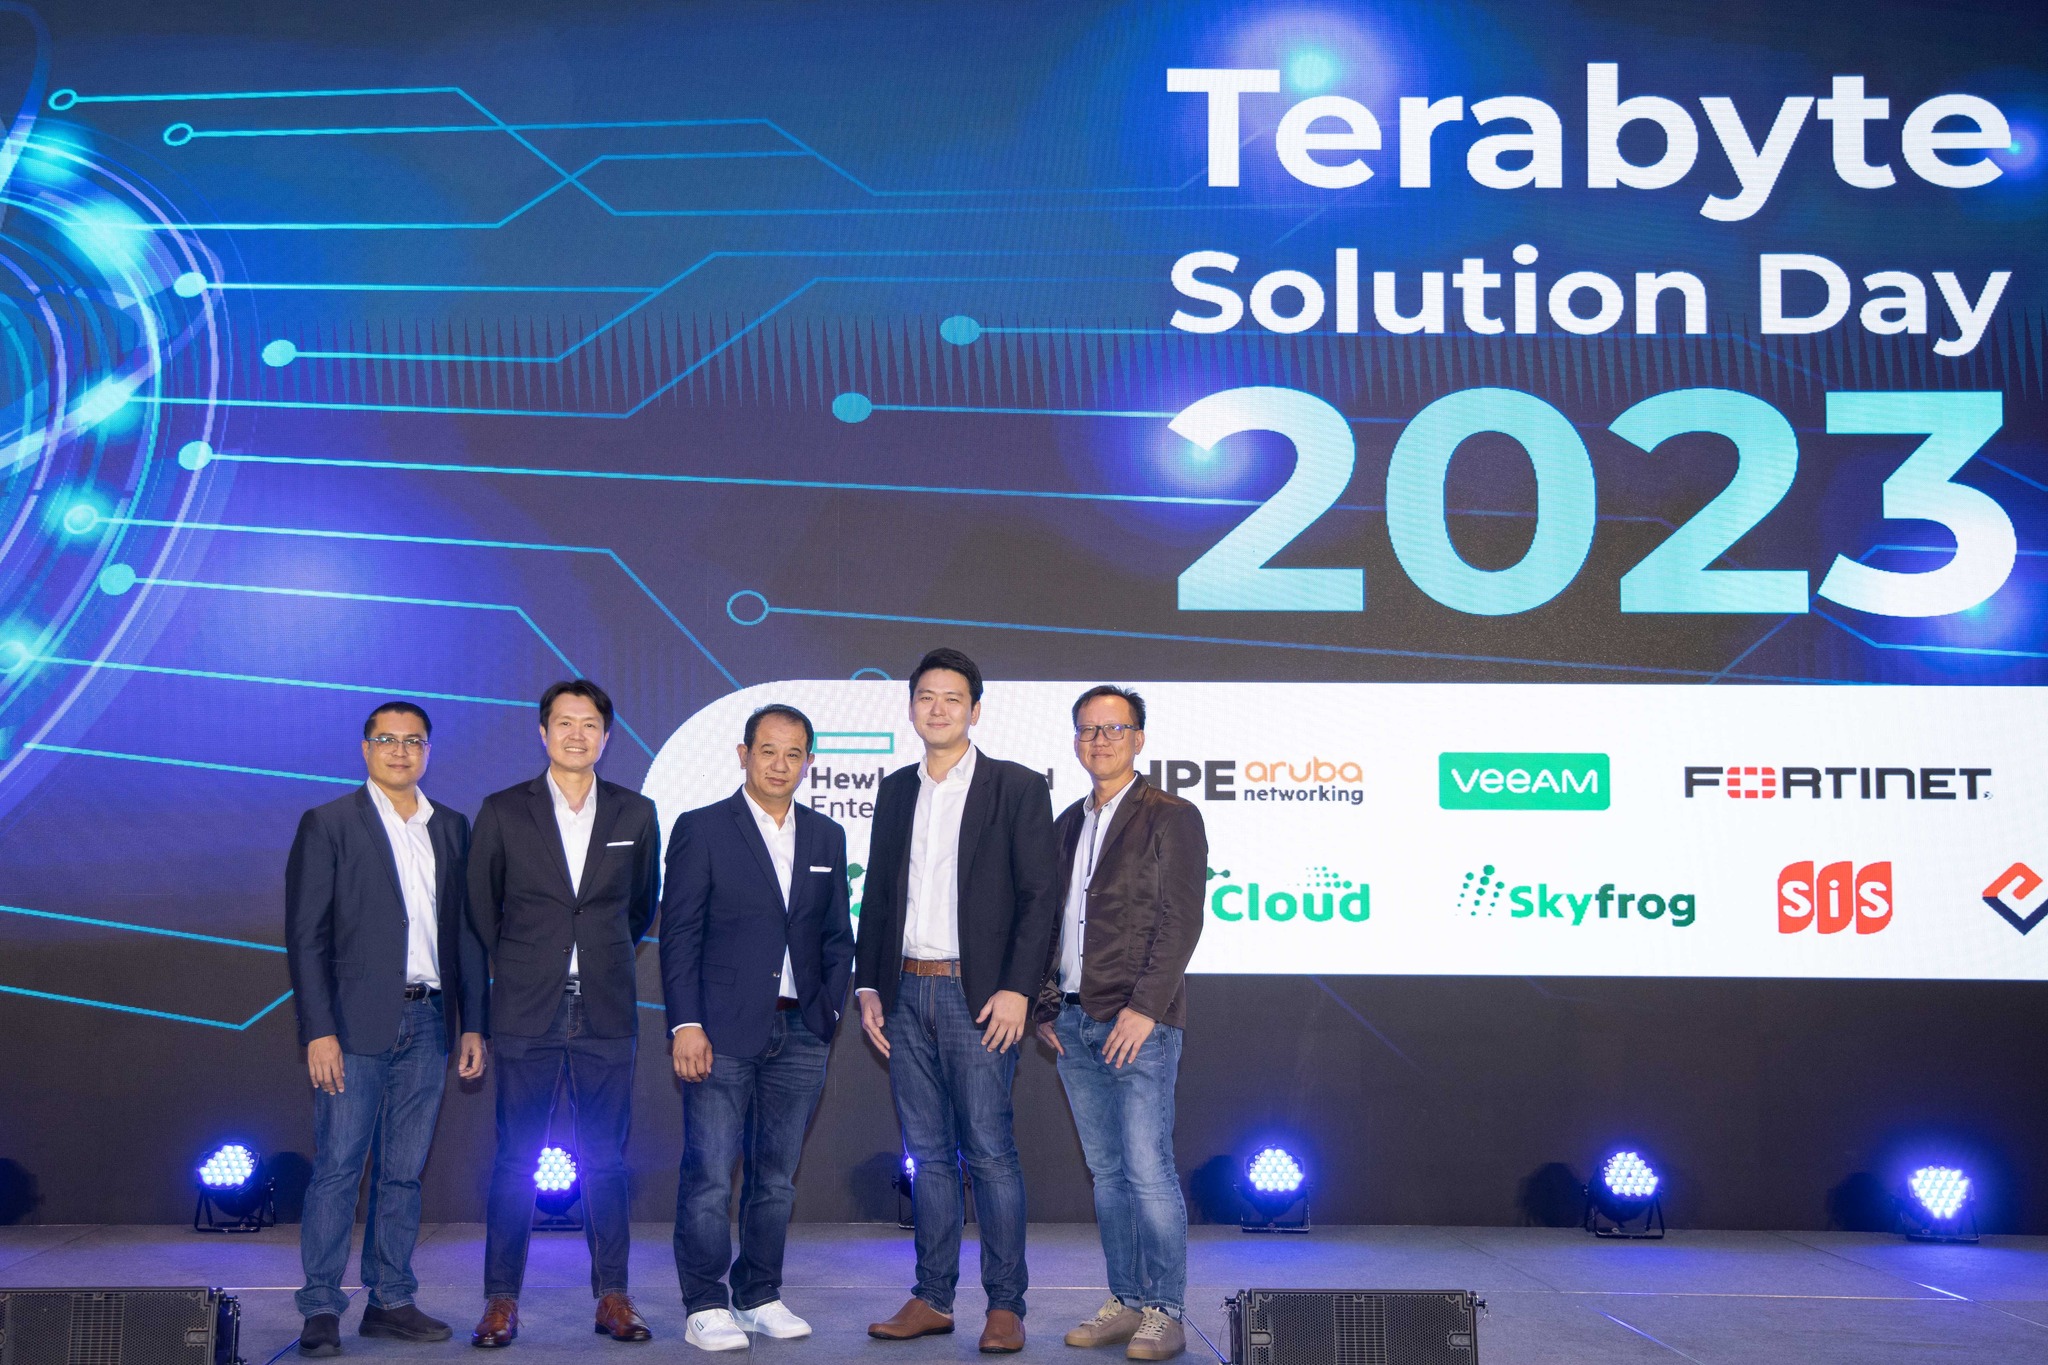 You are currently viewing Terabyte Solution Day 2023